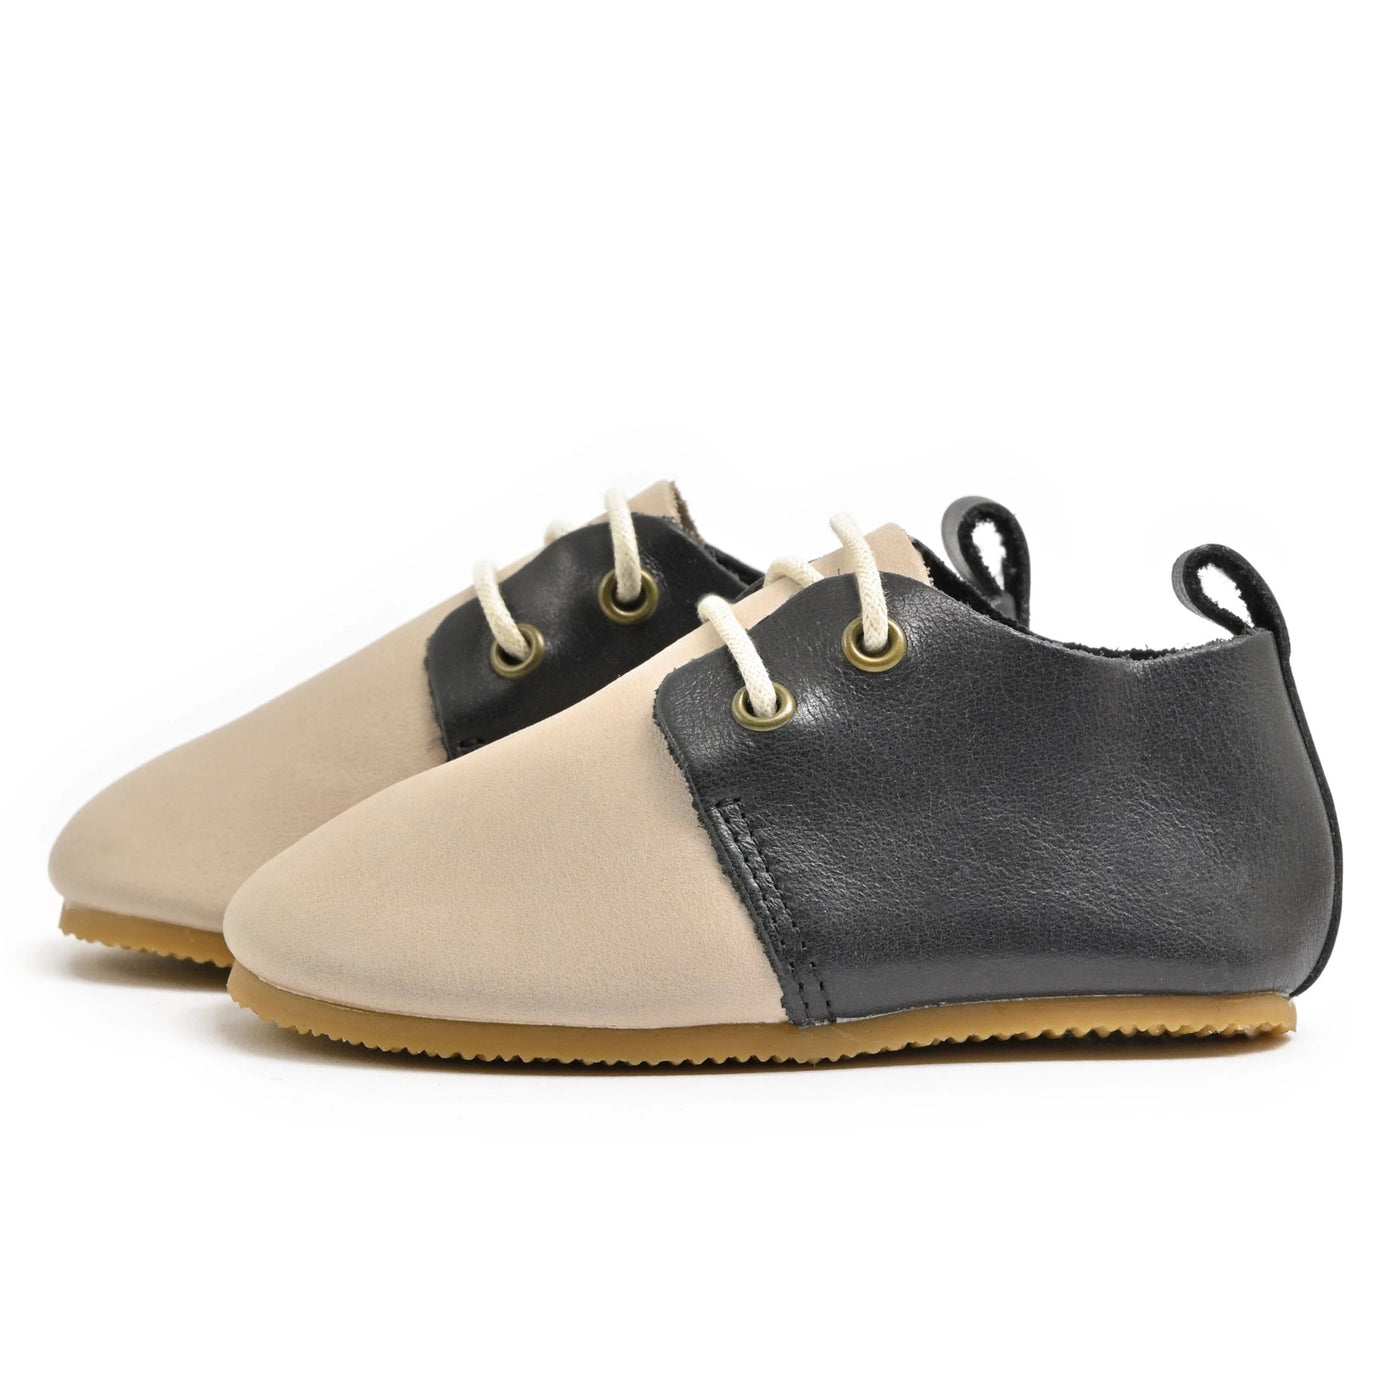 Saddle - Low Top Oxfords - Hard Sole